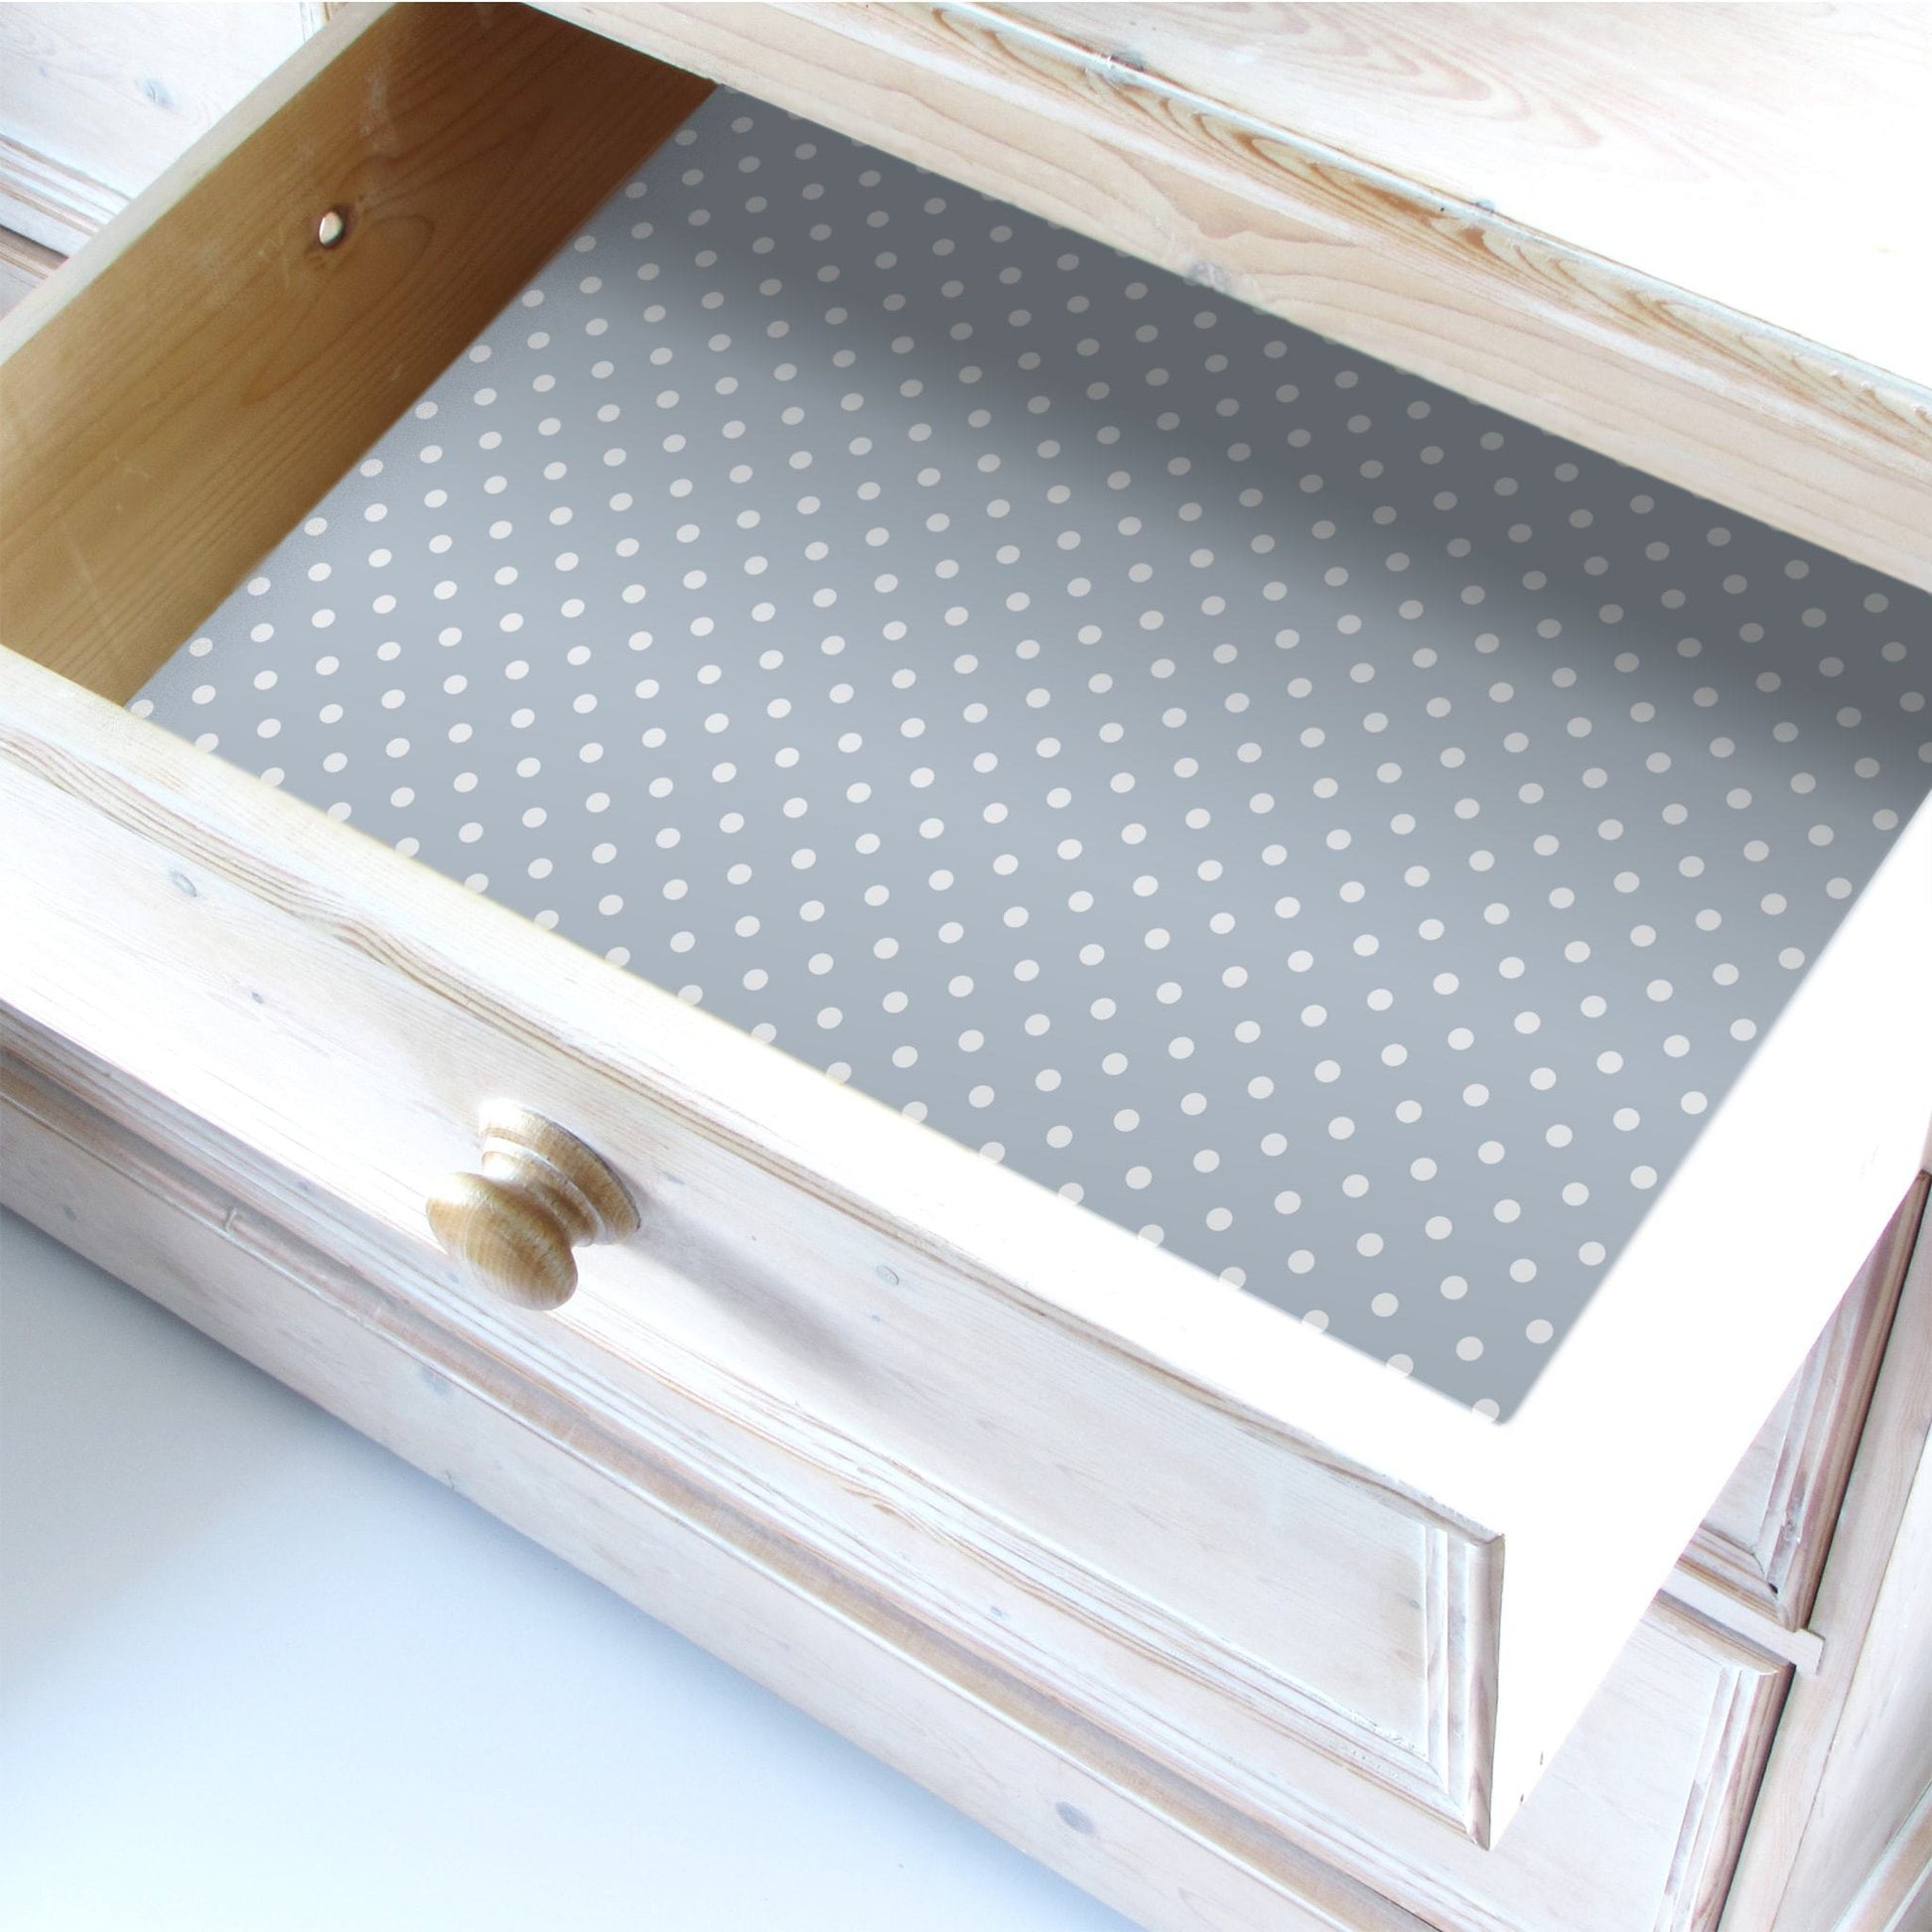 THE MASTER HERBALIST | Wipe Clean & Unscented Drawer Liners in a COOKS BLUE POLKA DOT Design. Perfect for Kitchen Drawers, Shelves, Cupboards & Cabinets. Made in Suffolk, England. (LIght Blue)